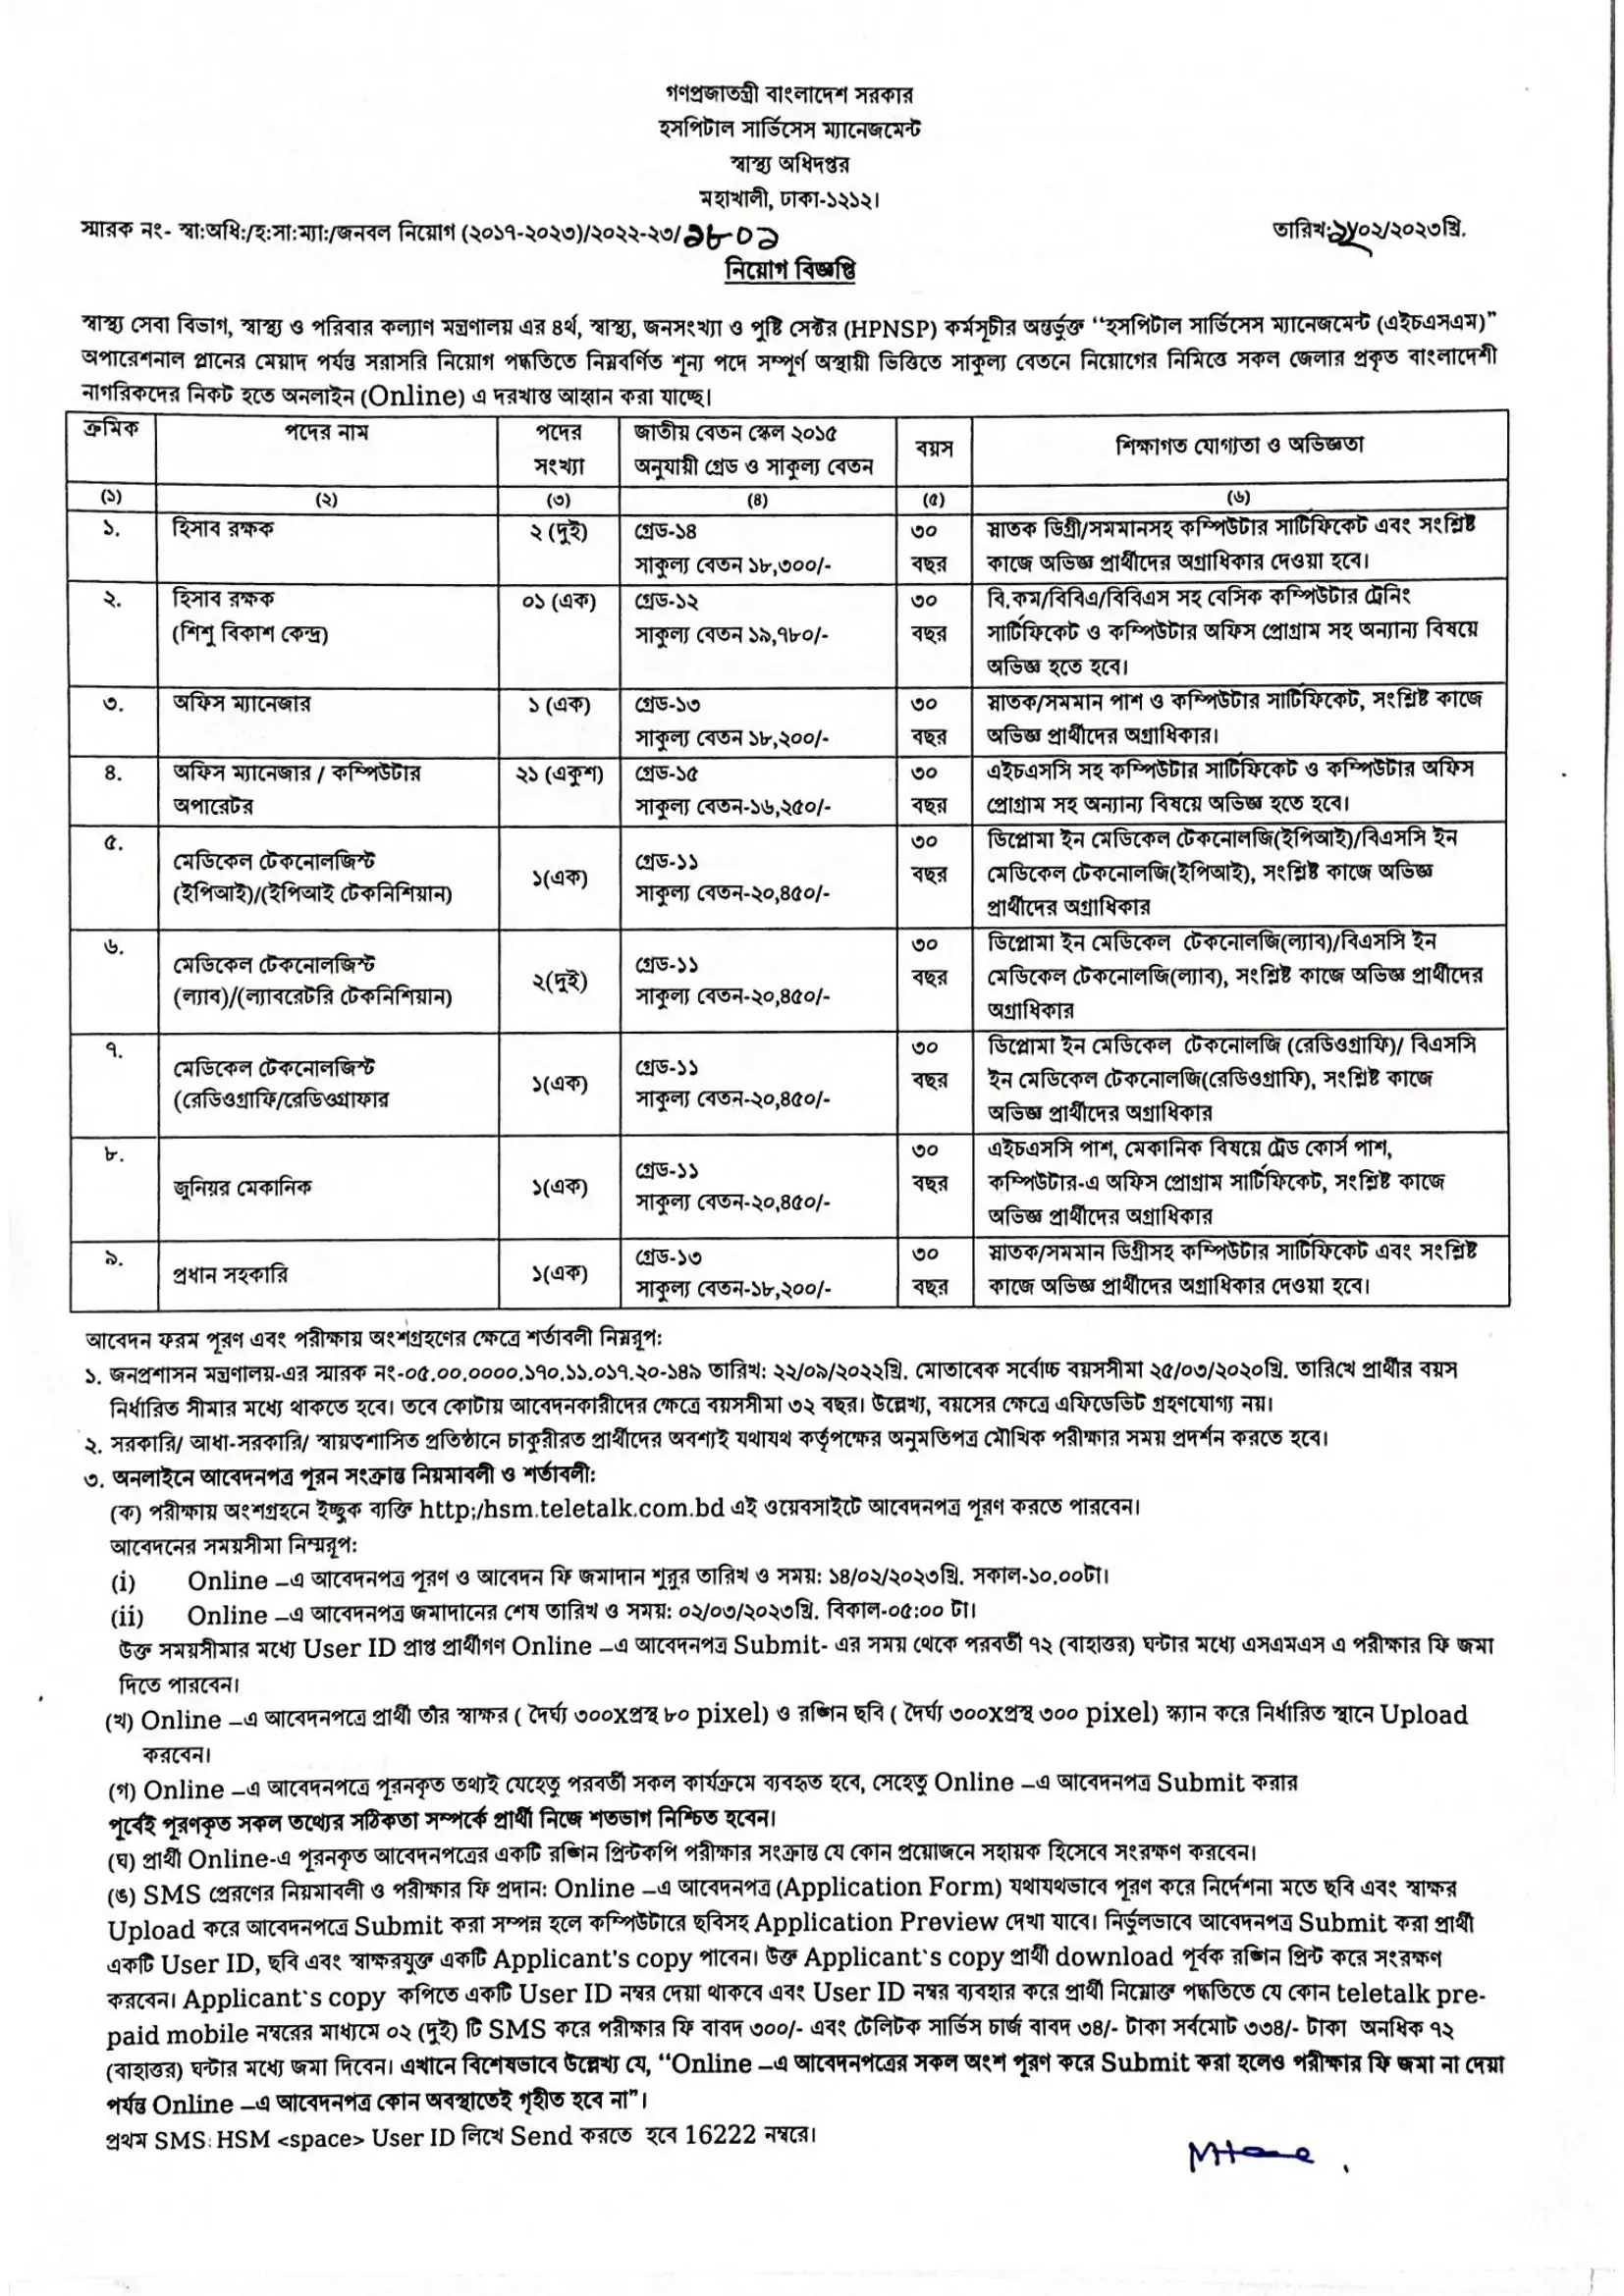 Third page of Directorate General of Health Services (DGHS) recruitment circular published on 12 February 2023